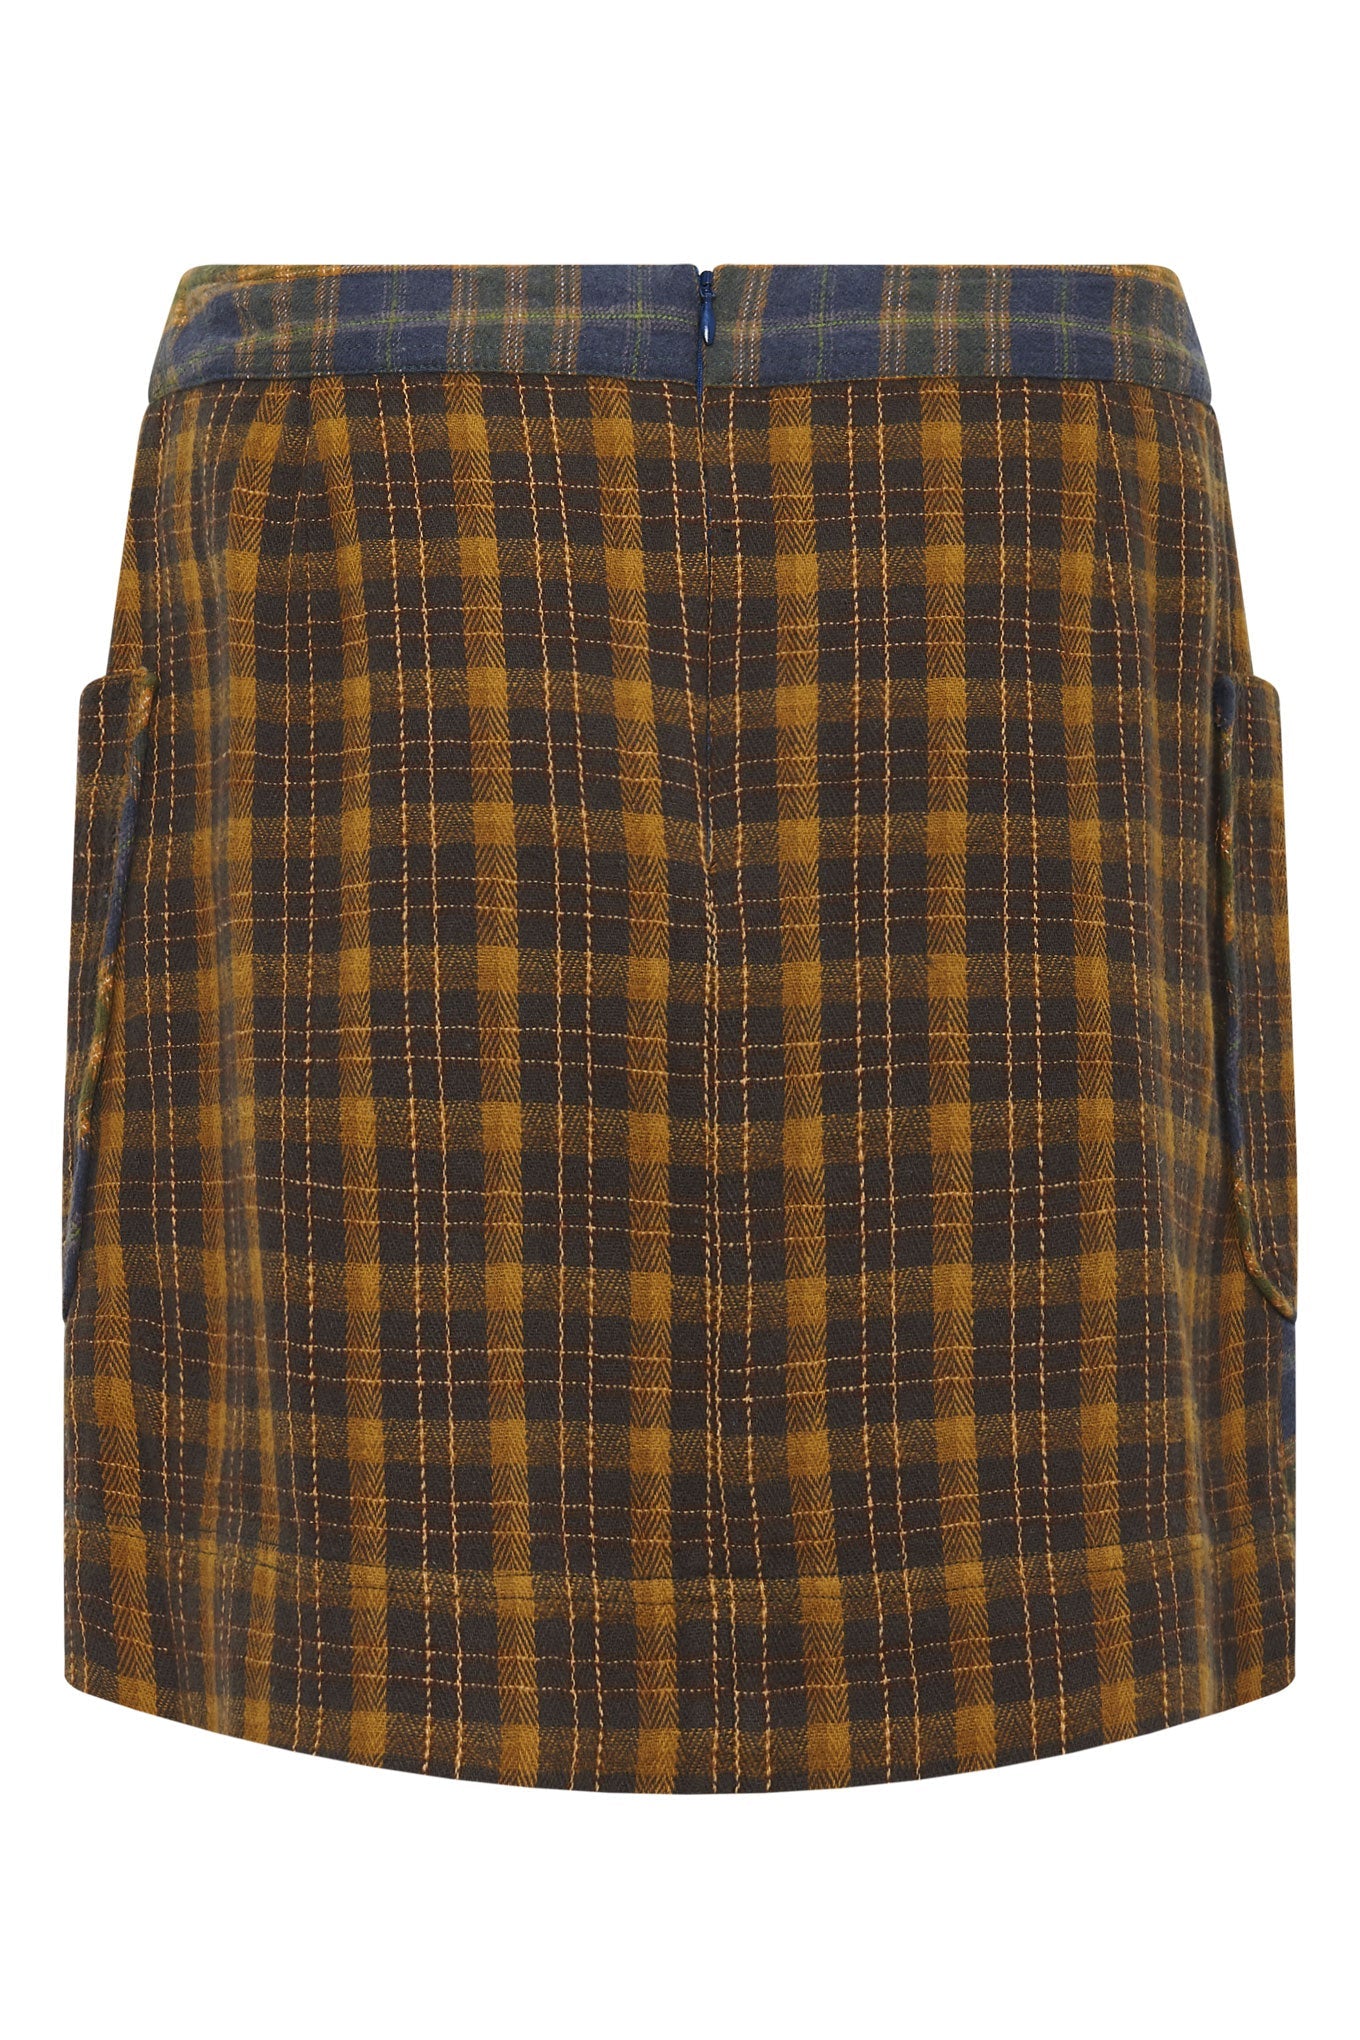 Colorful, checked mini skirt SUKI made from 100% organic cotton by Komodo